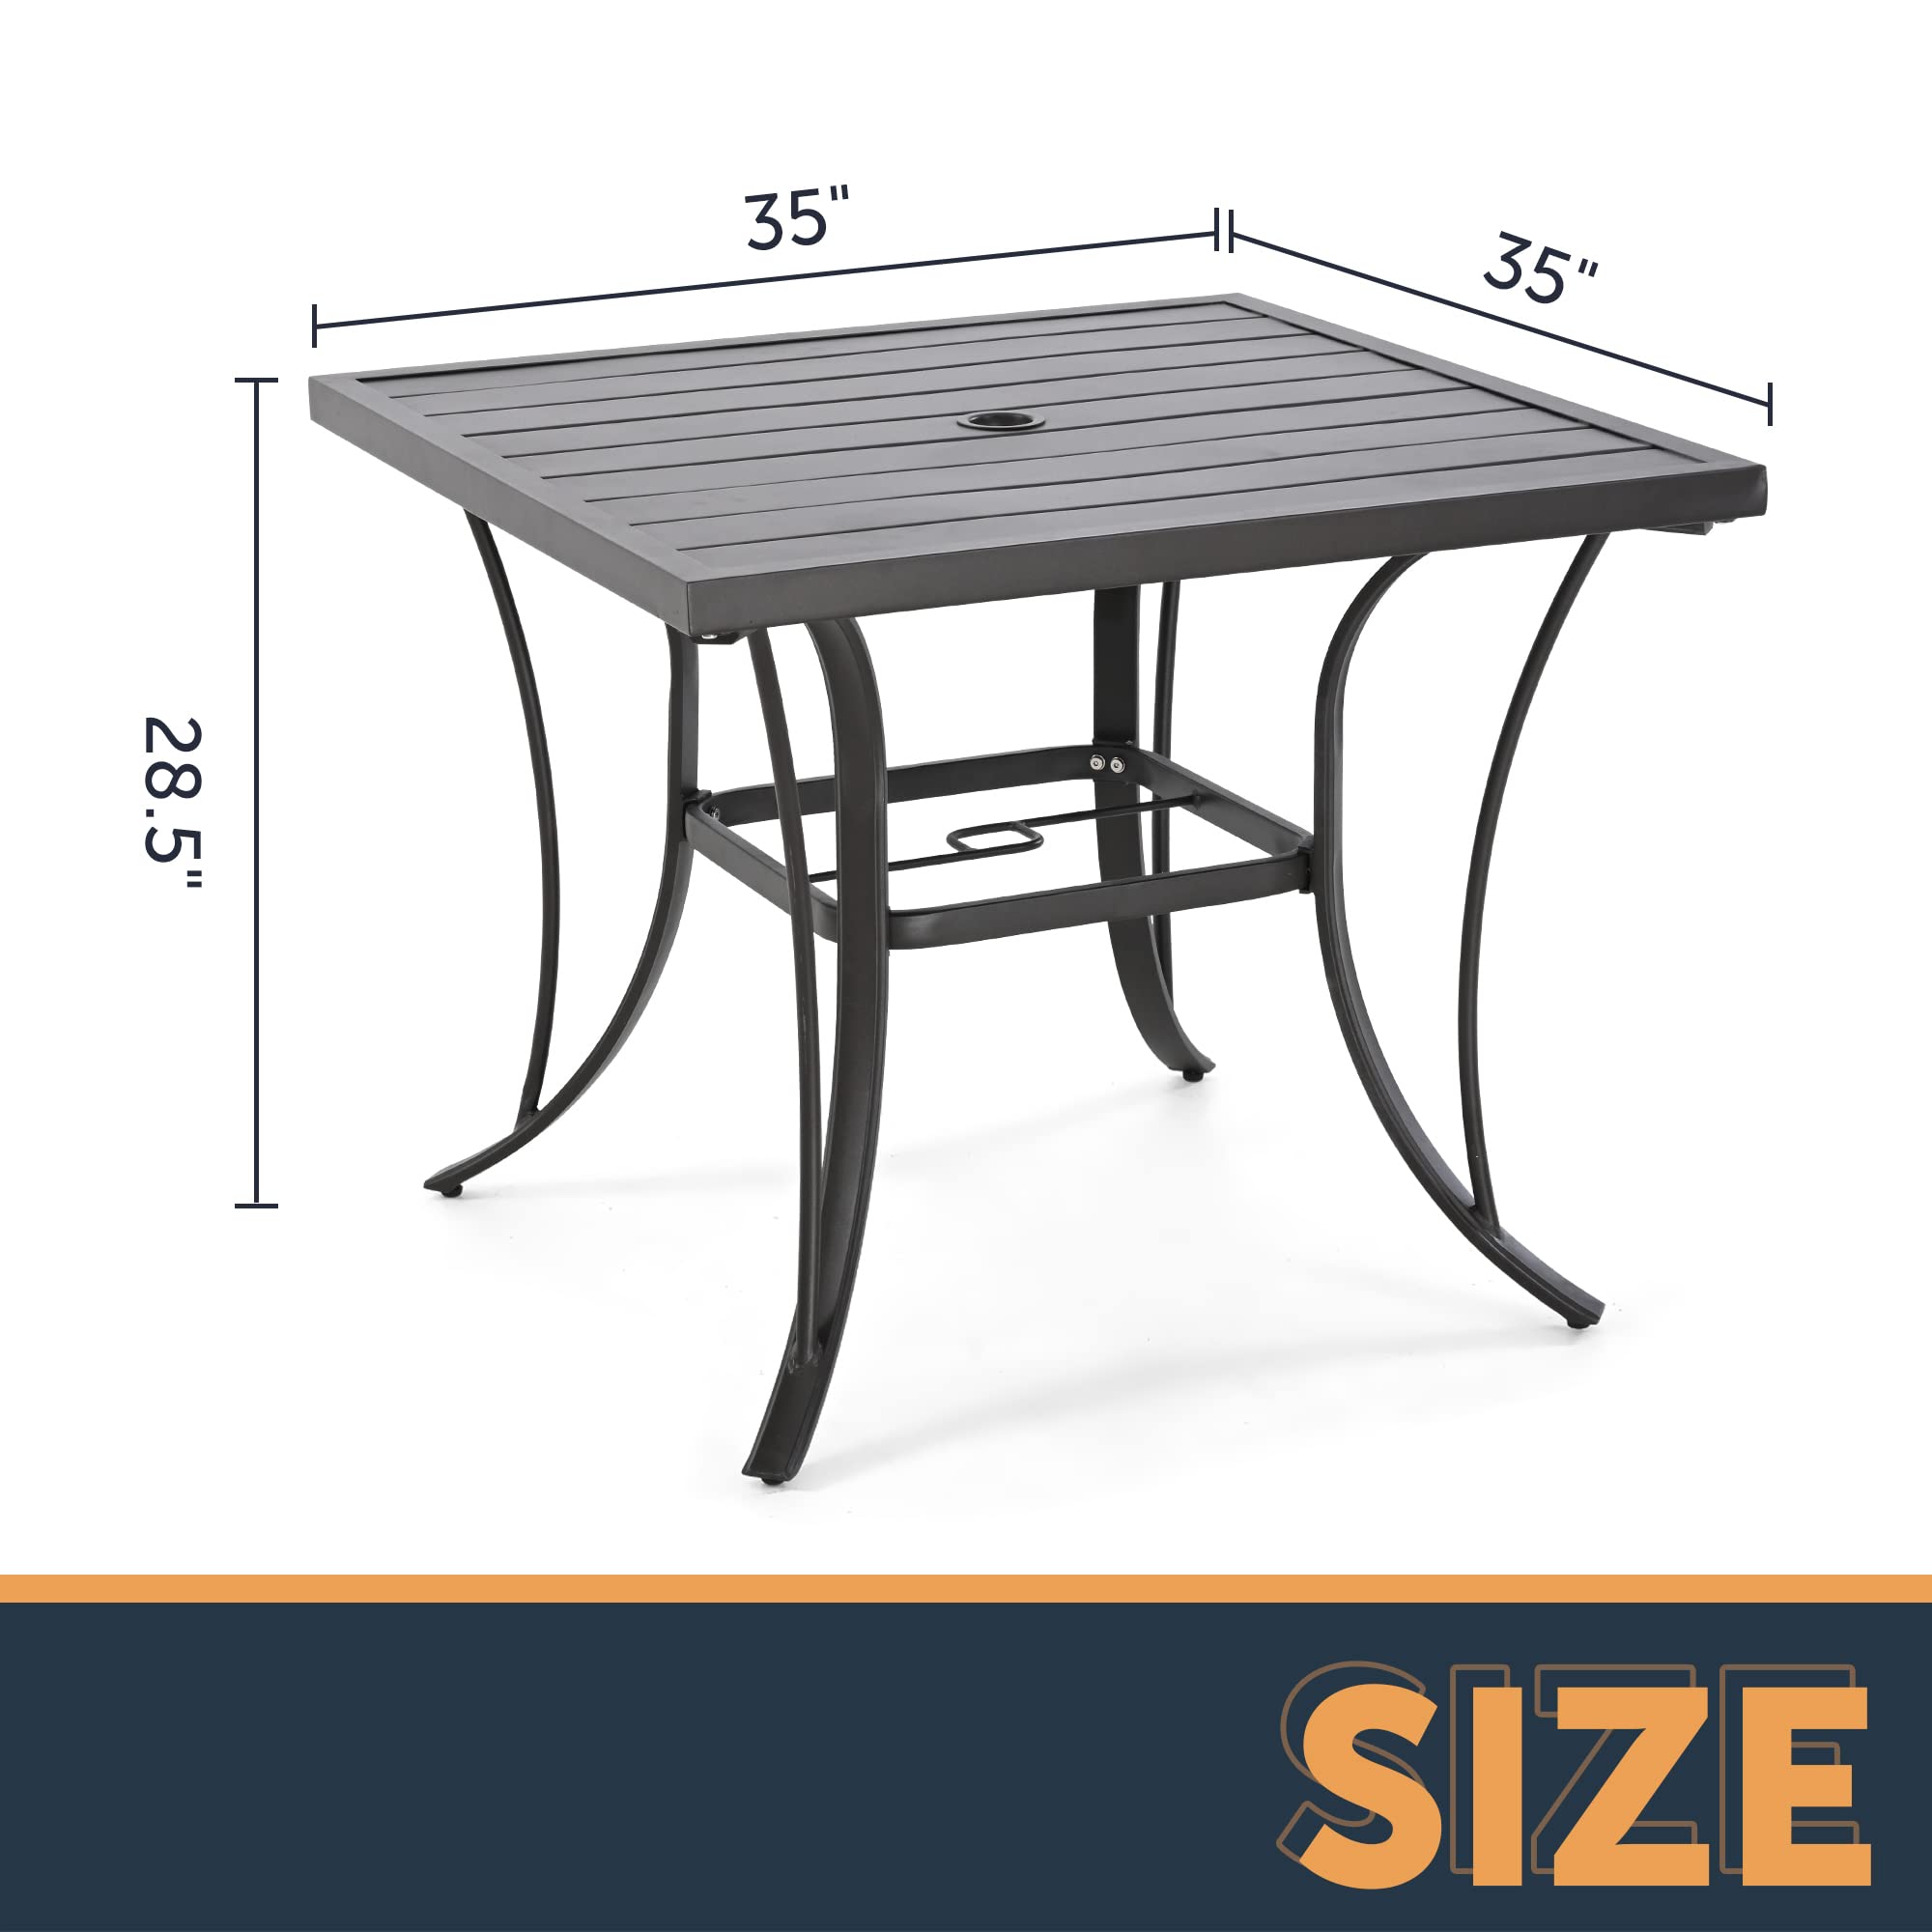 HAPPATIO Patio Dining Table, 4 Person Brown Square Patio Backyard Furniture Table Metal Steel Slat Patio Dining Table with Umbrella Hole Dia 2"（35" x 35" x 28.5"）